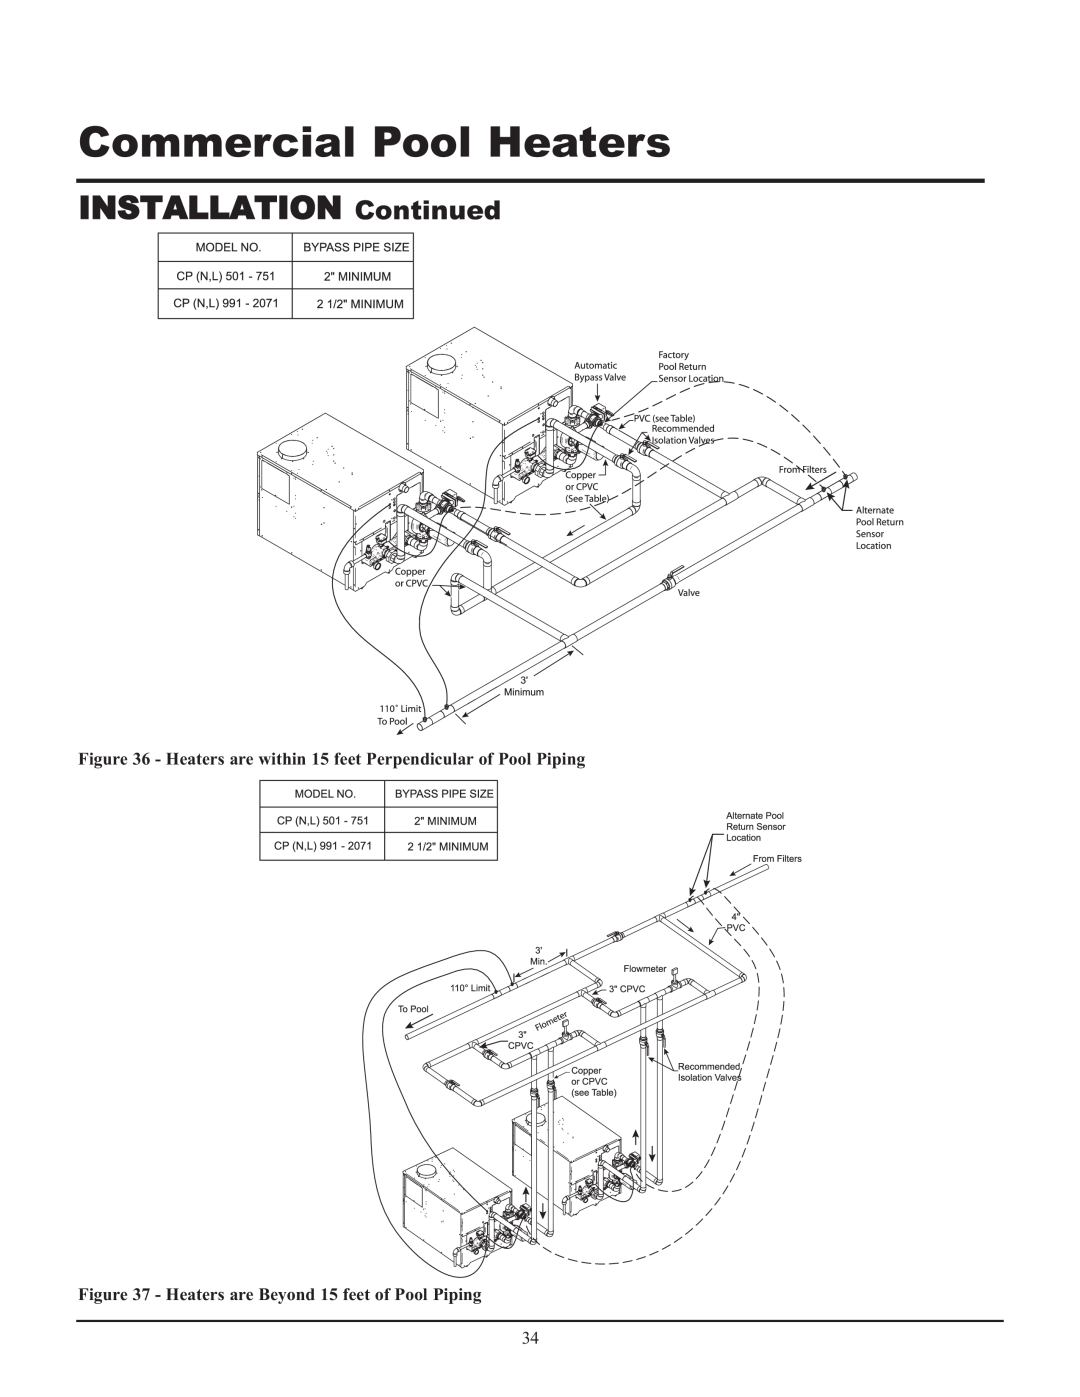 Lochinvar GAS HEATER FOR COMMERICAL POOL APPLICATIONS service manual Commercial Pool Heaters, INSTALLATION Continued 